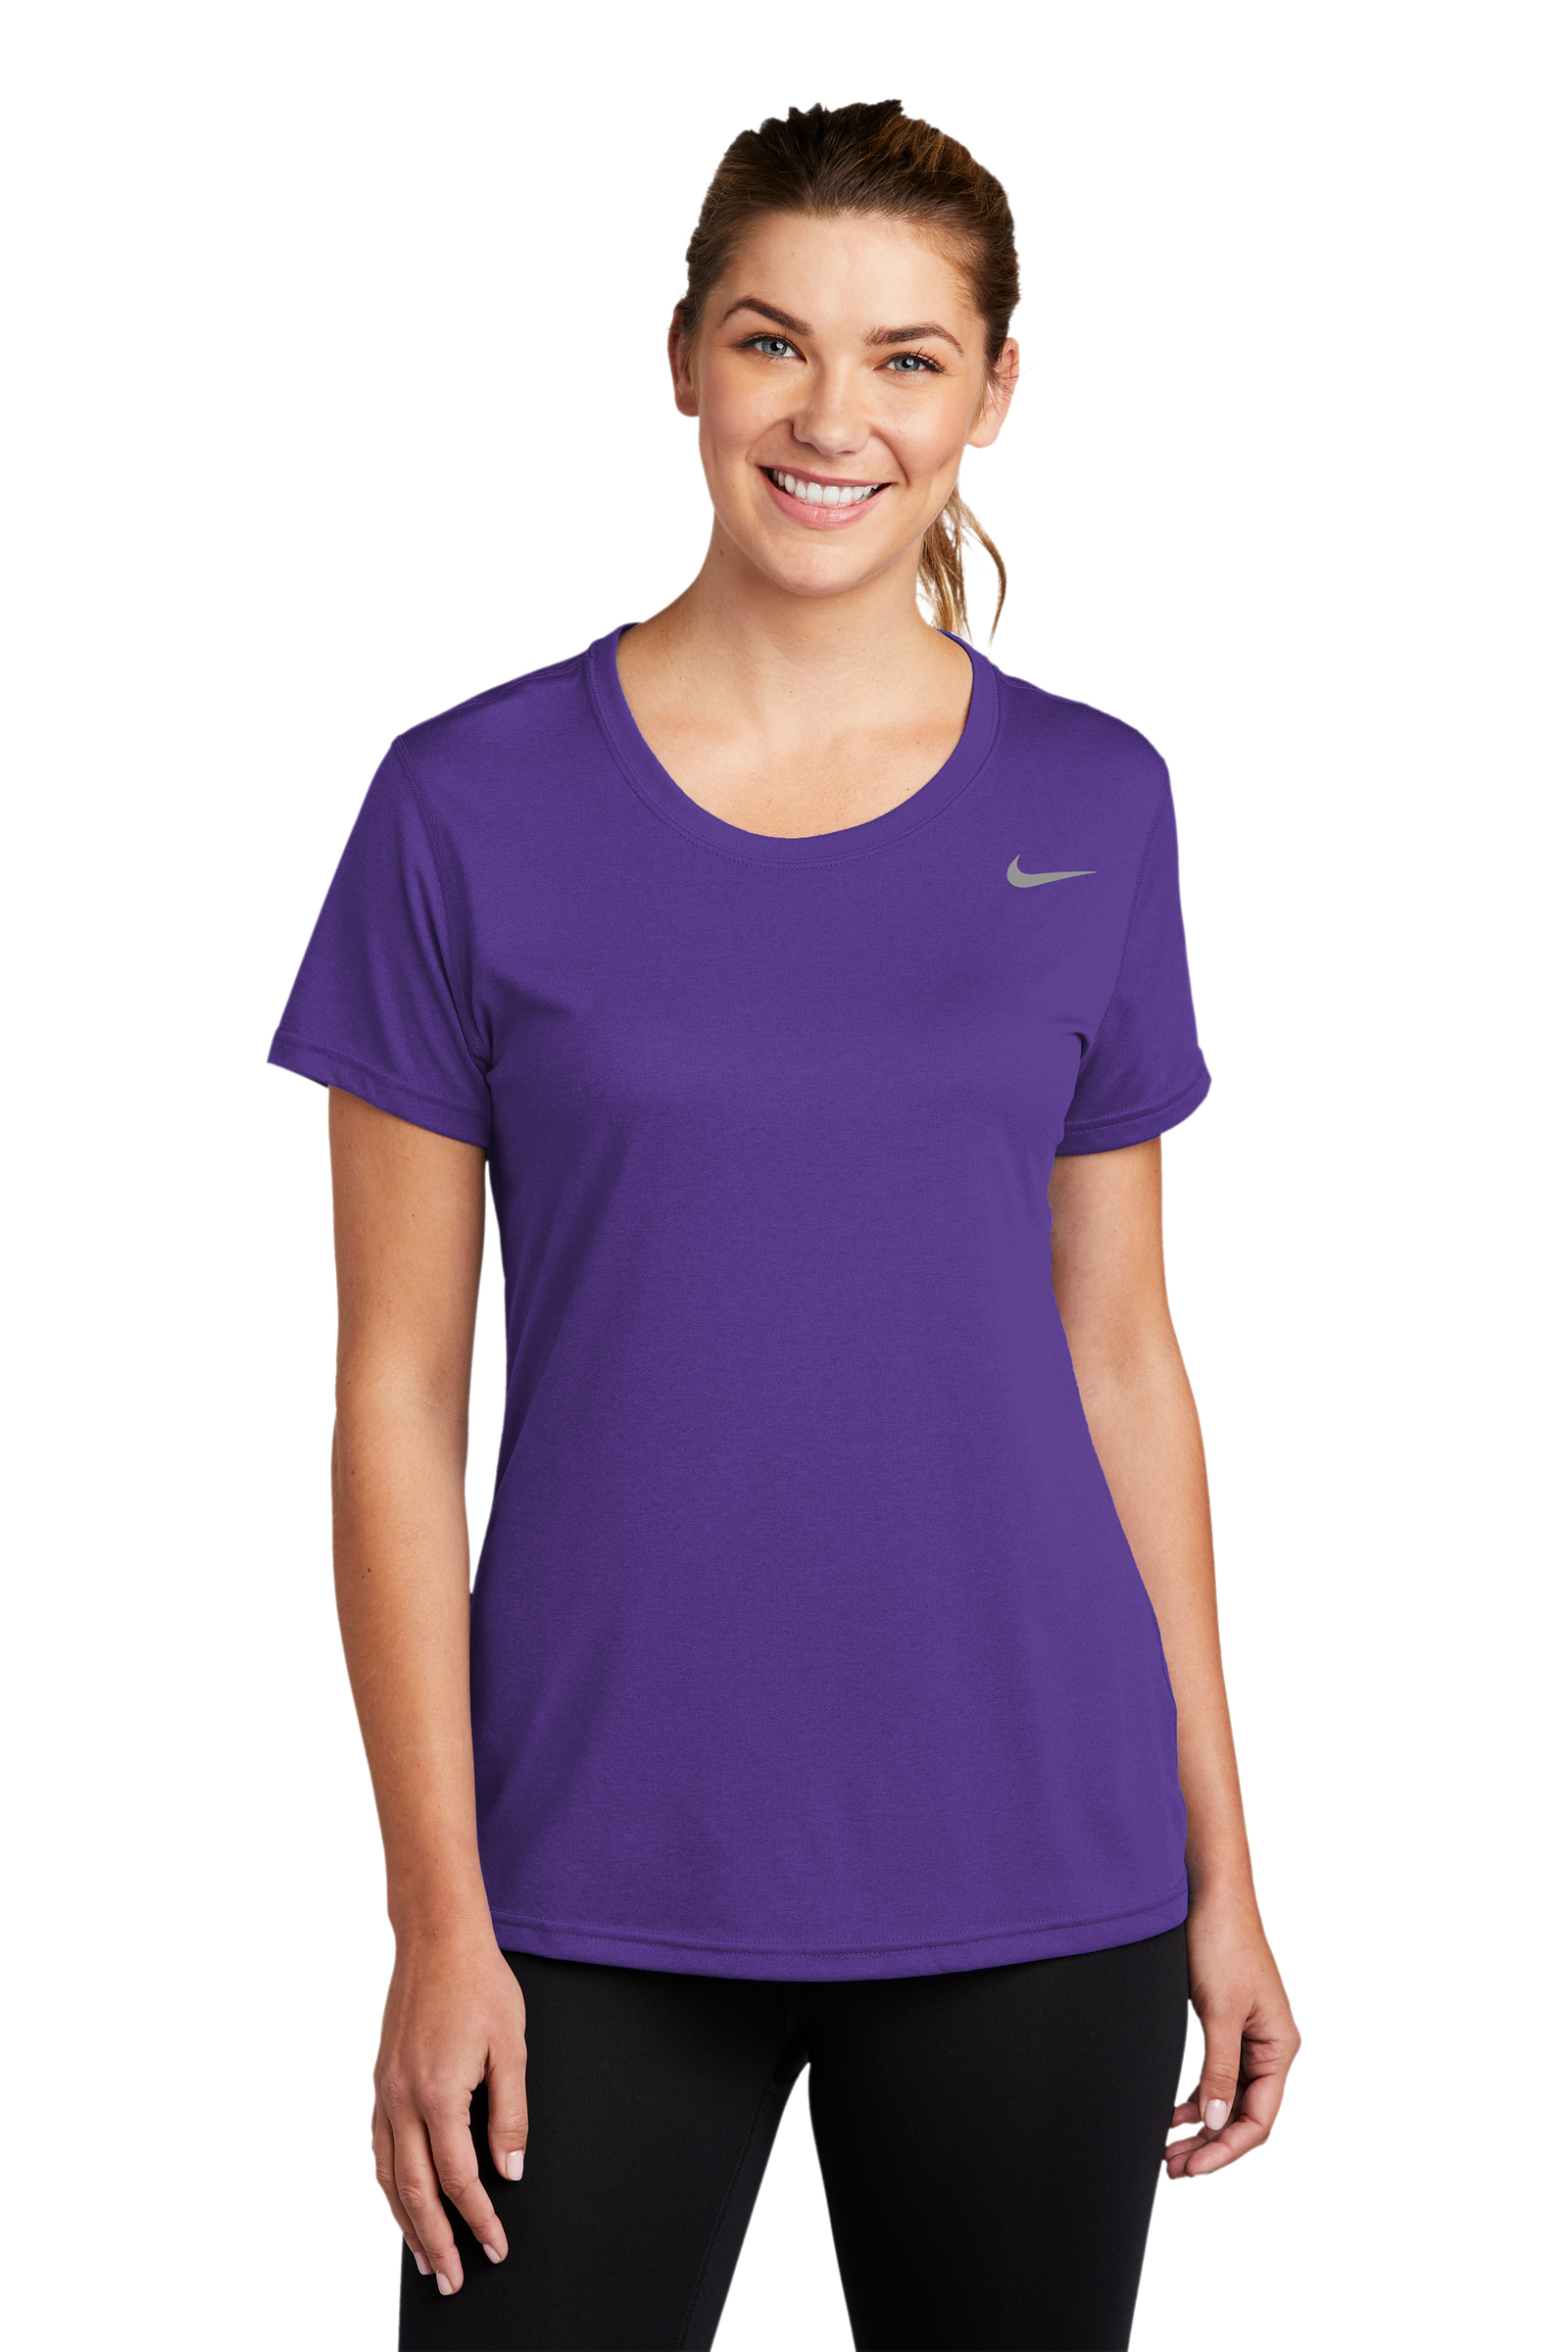 Nike Embroidered Women's Legend Tee